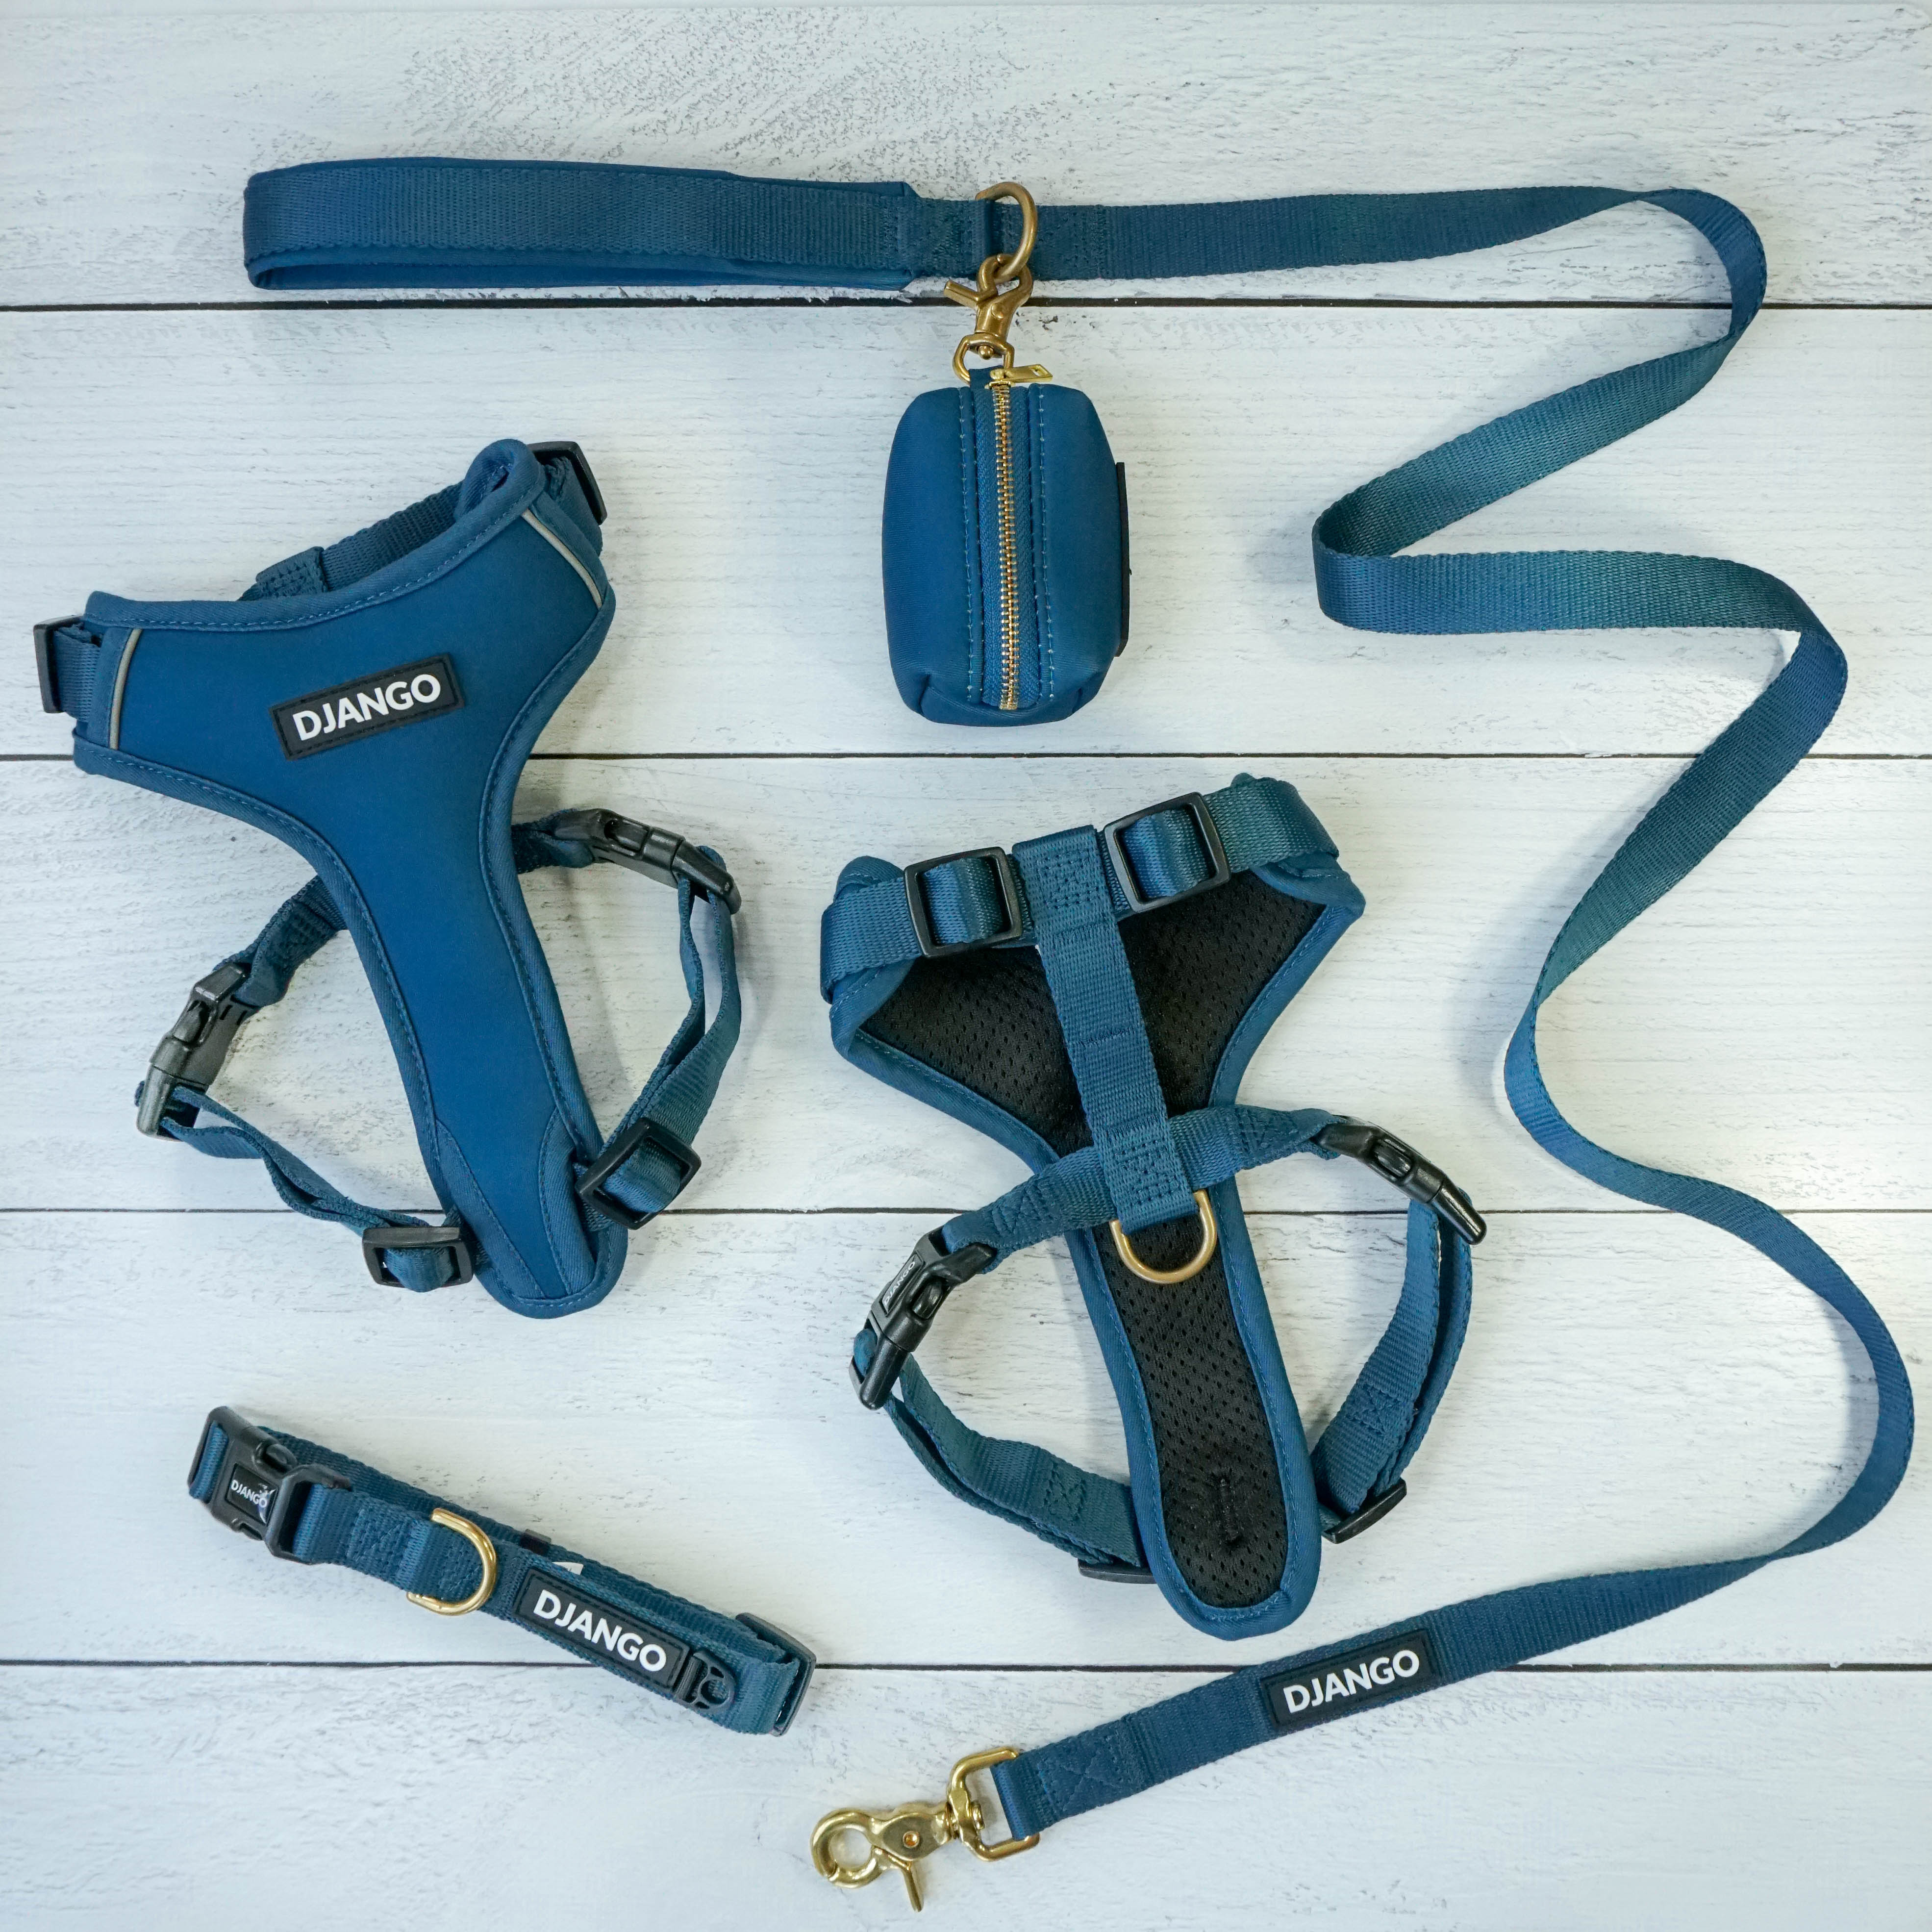 DJANGO Adventure Bundle in Indigo Blue - The Adventure Bundle includes our comfortable, durable, and weather-resistant Adventure Dog Harness, Adventure Dog Collar, Standard Adventure Dog Leash, and chic Waste Bag Holder. All items feature high-strength and corrosion-resistant solid brass hardware. Save $$$ when you complete your set and order the Adventure Bundle - djangobrand.com